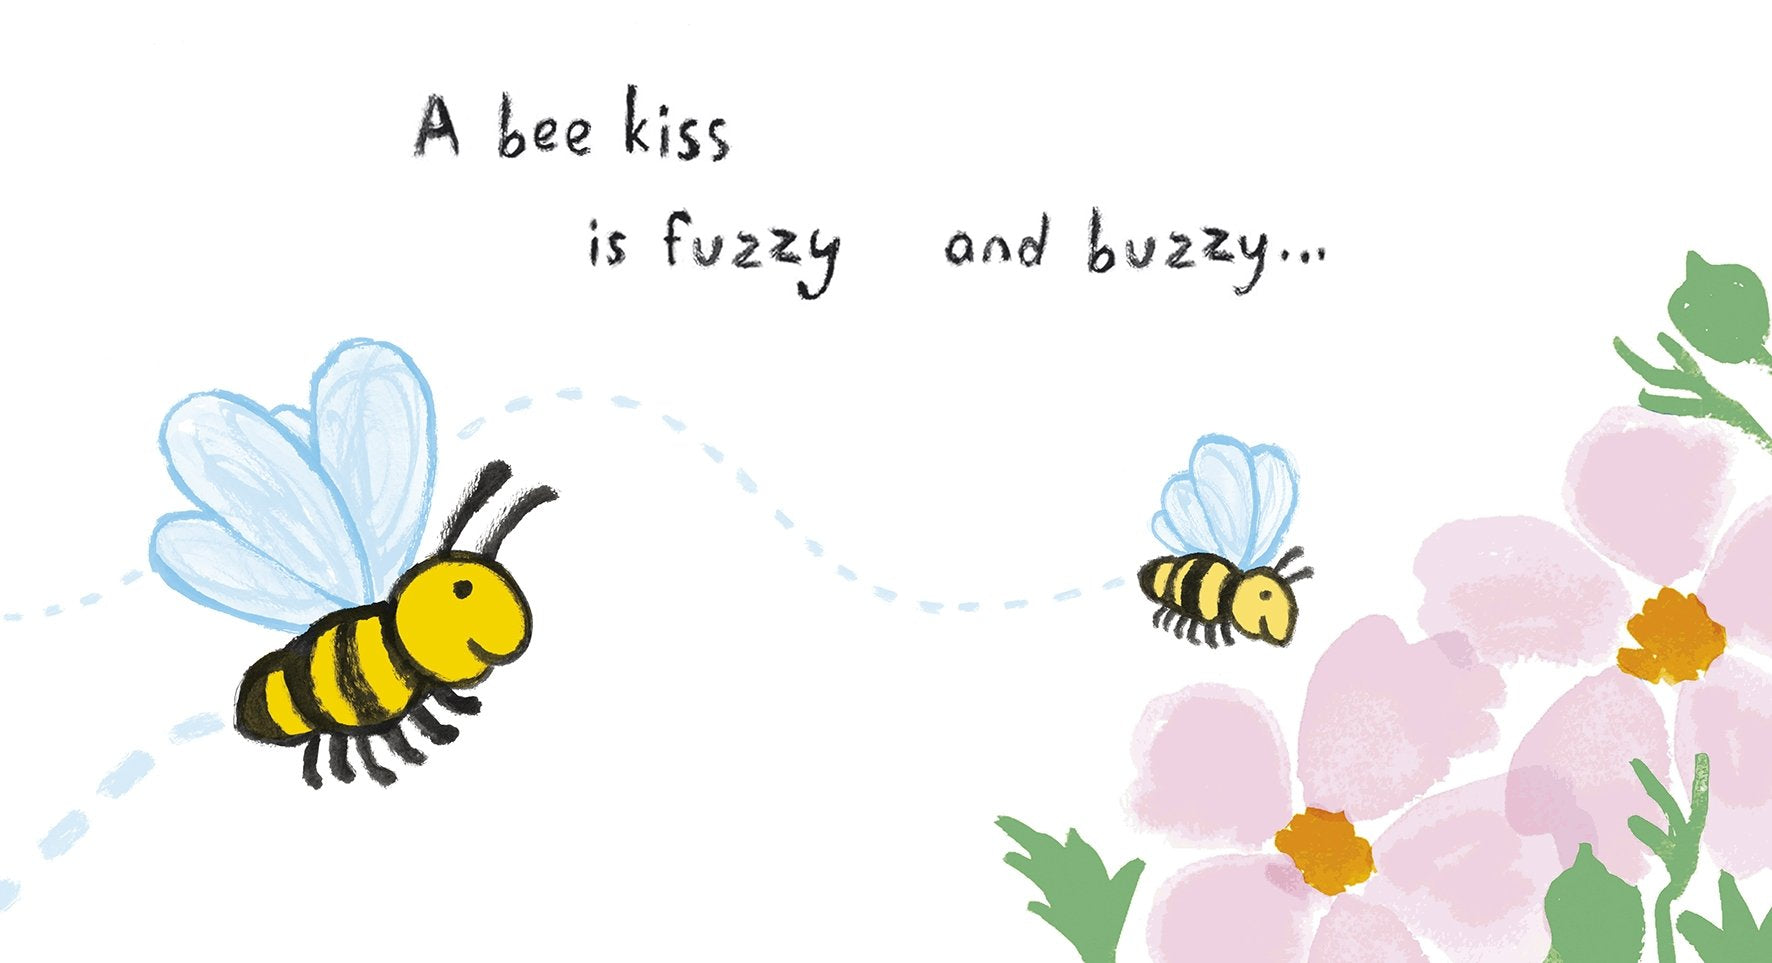 Image shows two bees “A bee kiss is fuzzy and buzzy…”